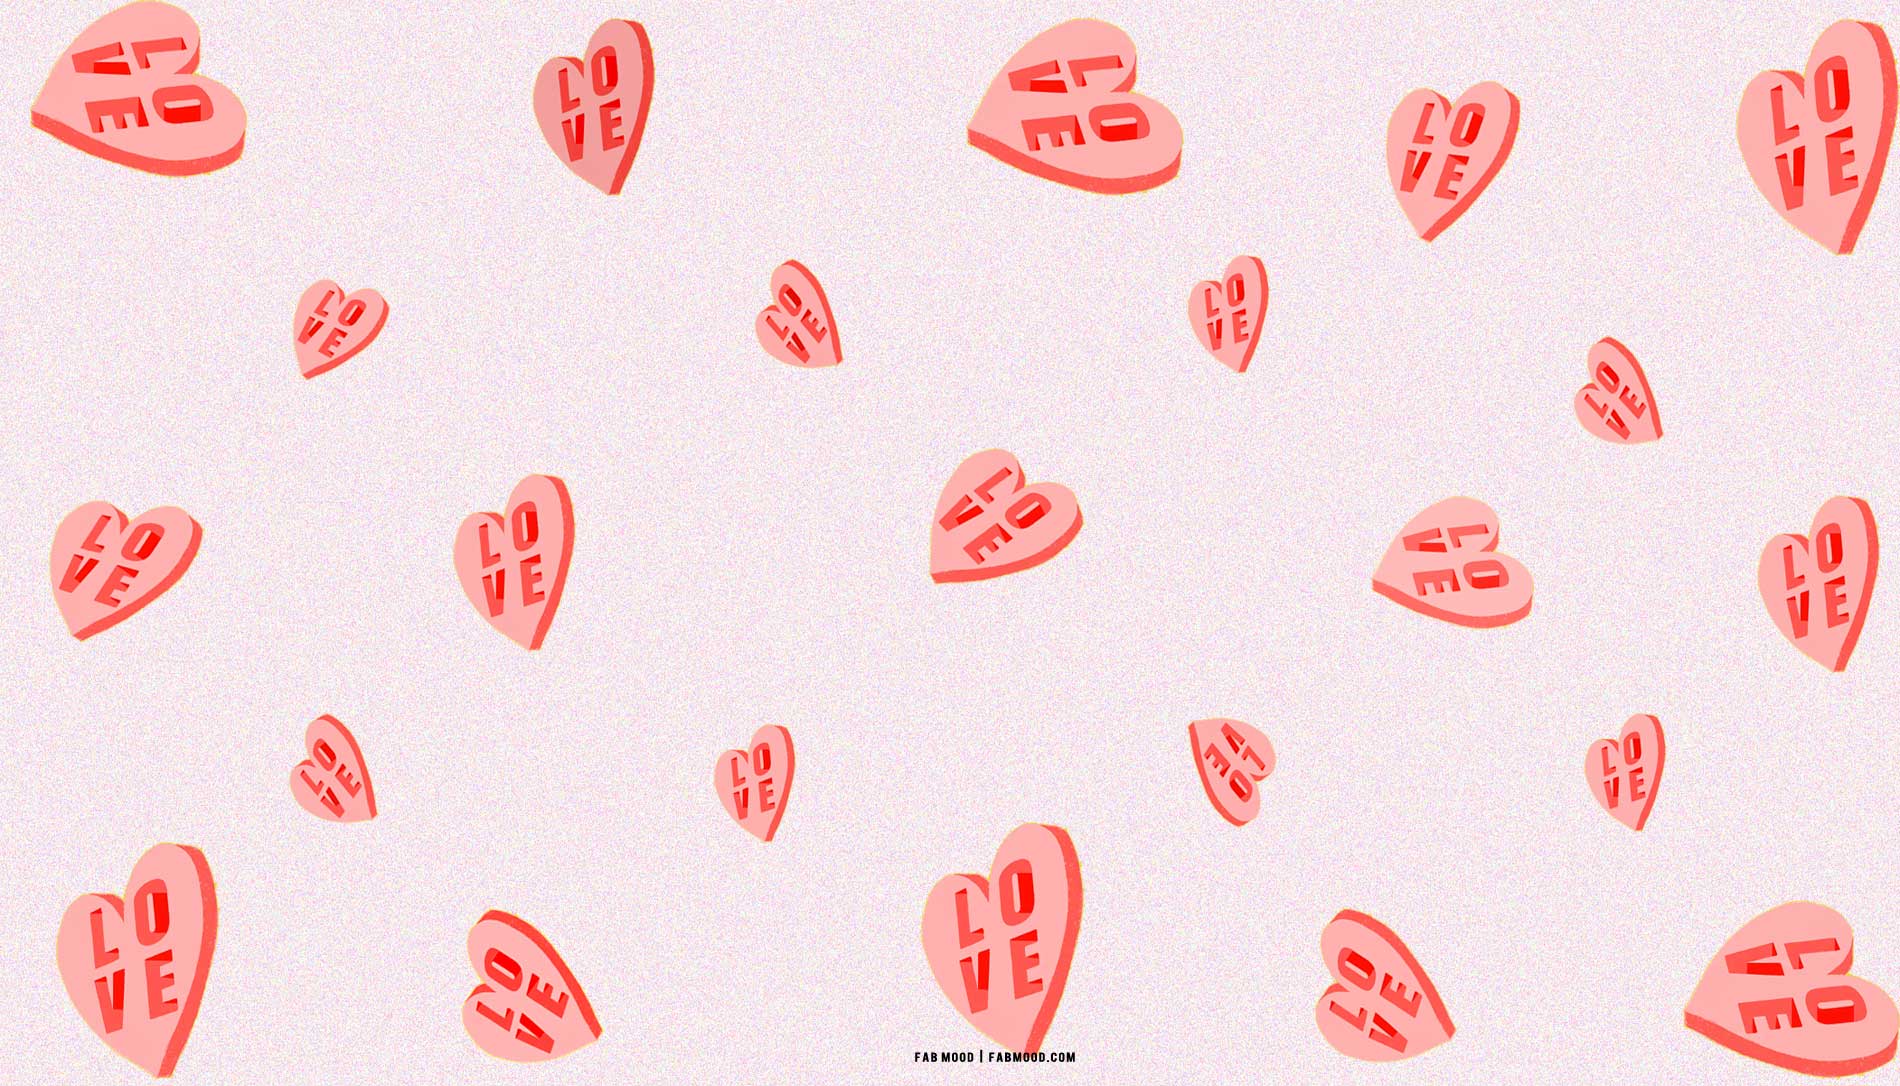 candy heart wallpaper phone, valentine's day hd wallpaper , aesthetic valentine's day wallpaper, valentines day wallpaper, valentine's day wallpaper cute, valentines wallpaper ideas, valentines wallpaper iphone, valentines wallpaper phone, valentine's day wallpaper 4k